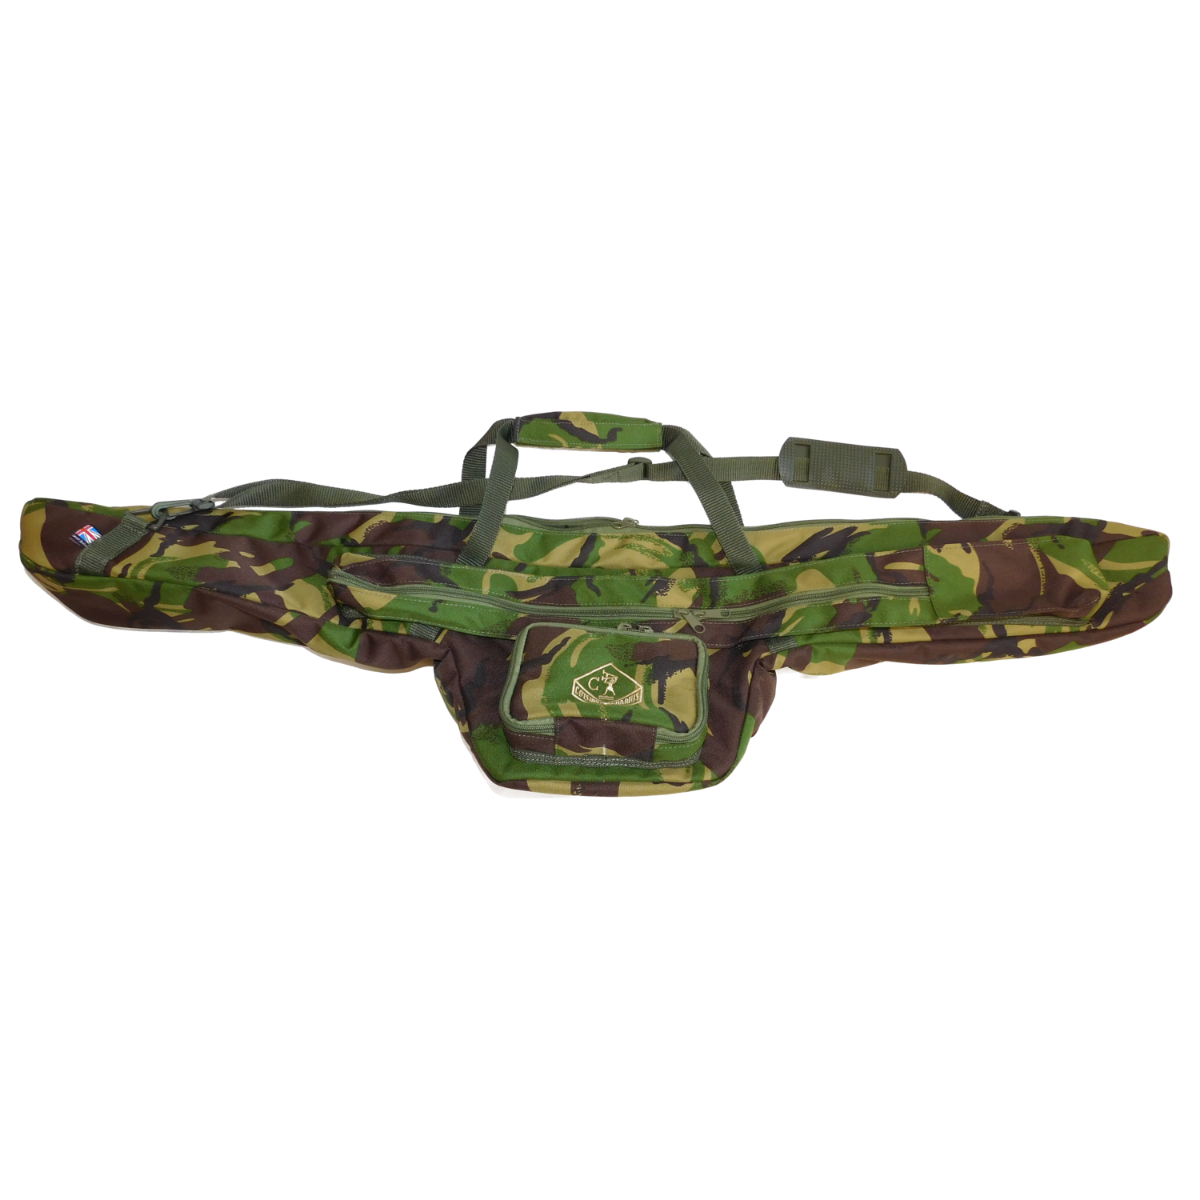 Cotswold Aquarius - Woodland Camo Three Rod 10ft Stalker Pouch